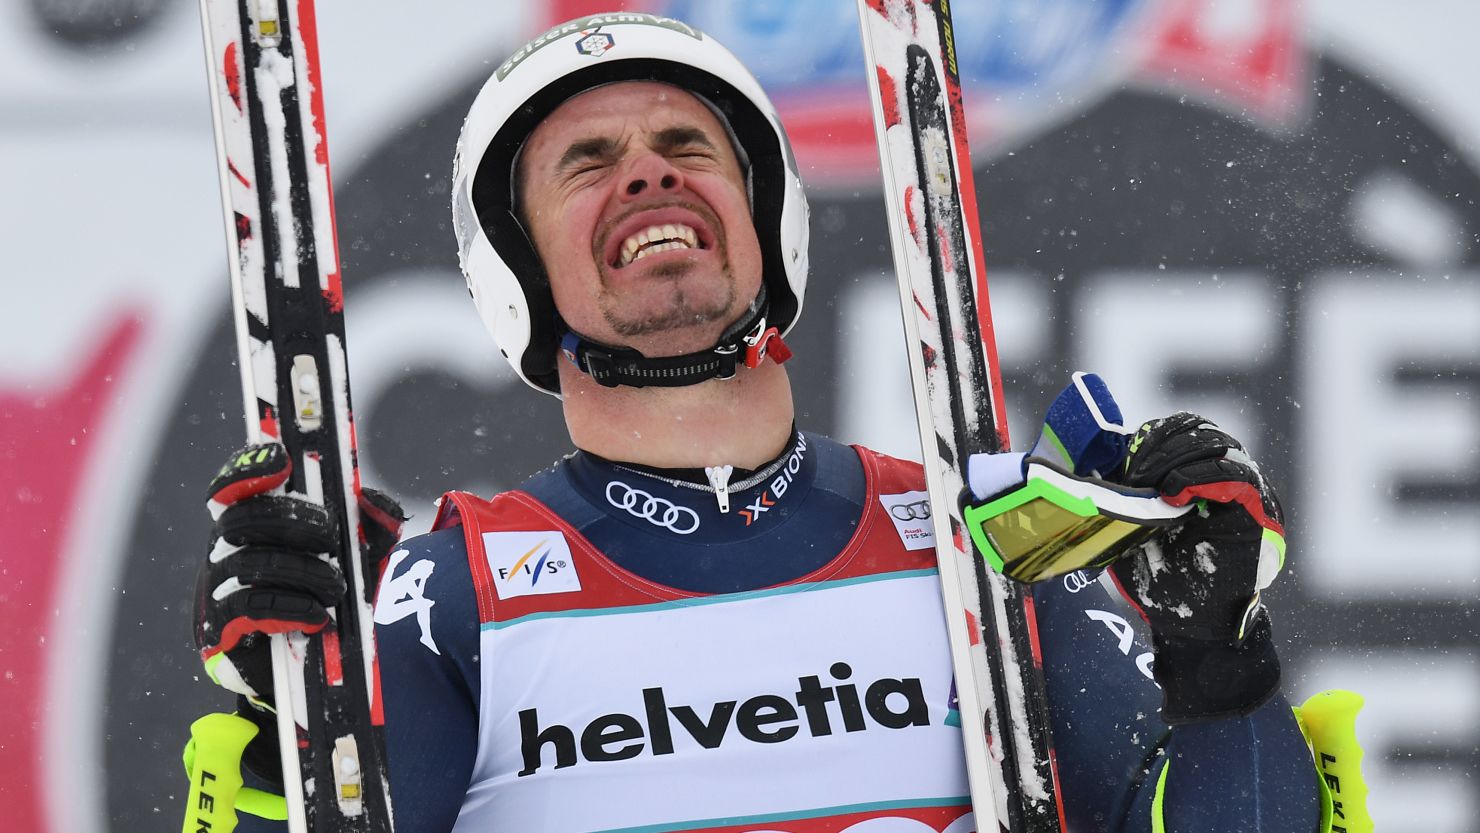 Peter Fill clinched his first downhill title after placing 10th in Wednesday's finale.